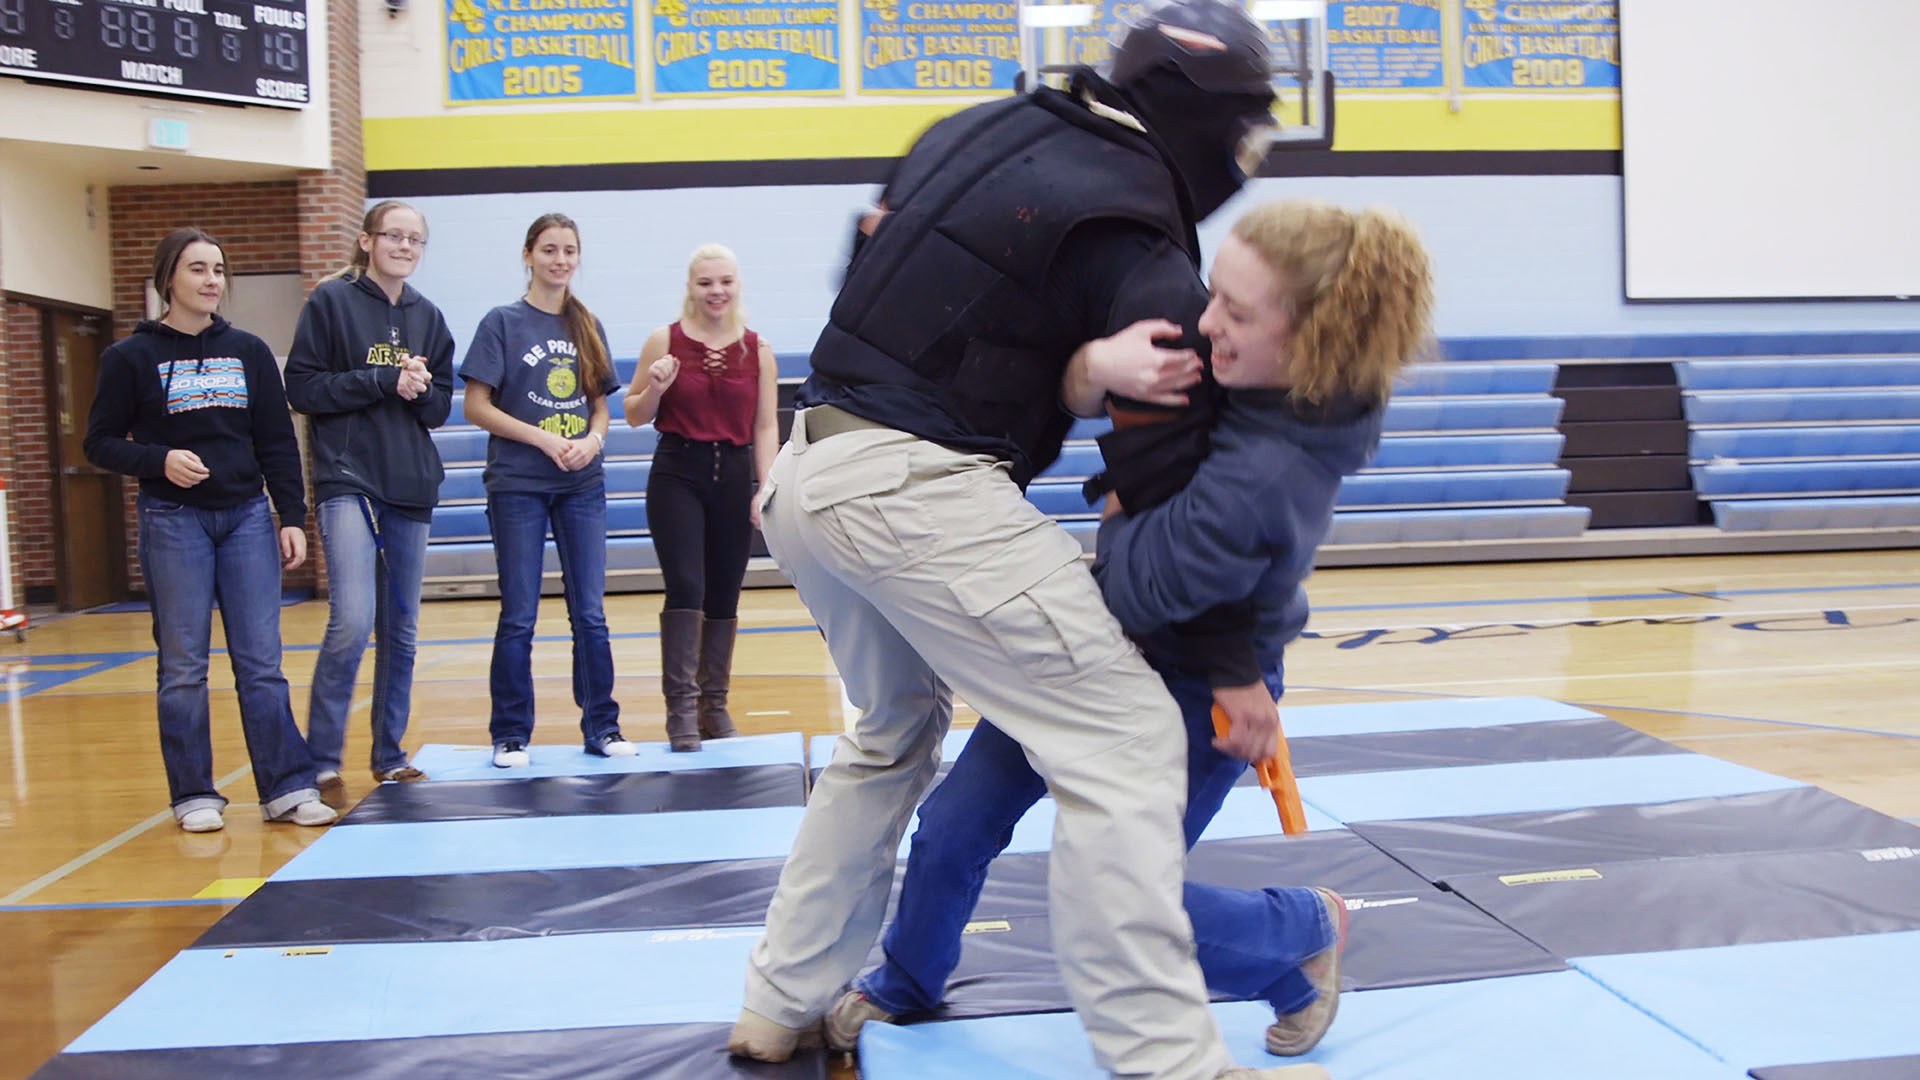 The drills we observed in Wyoming increased in escalation as the students got older. Here, a high school student was asked to practice tackling a trainer armed with a fake gun.